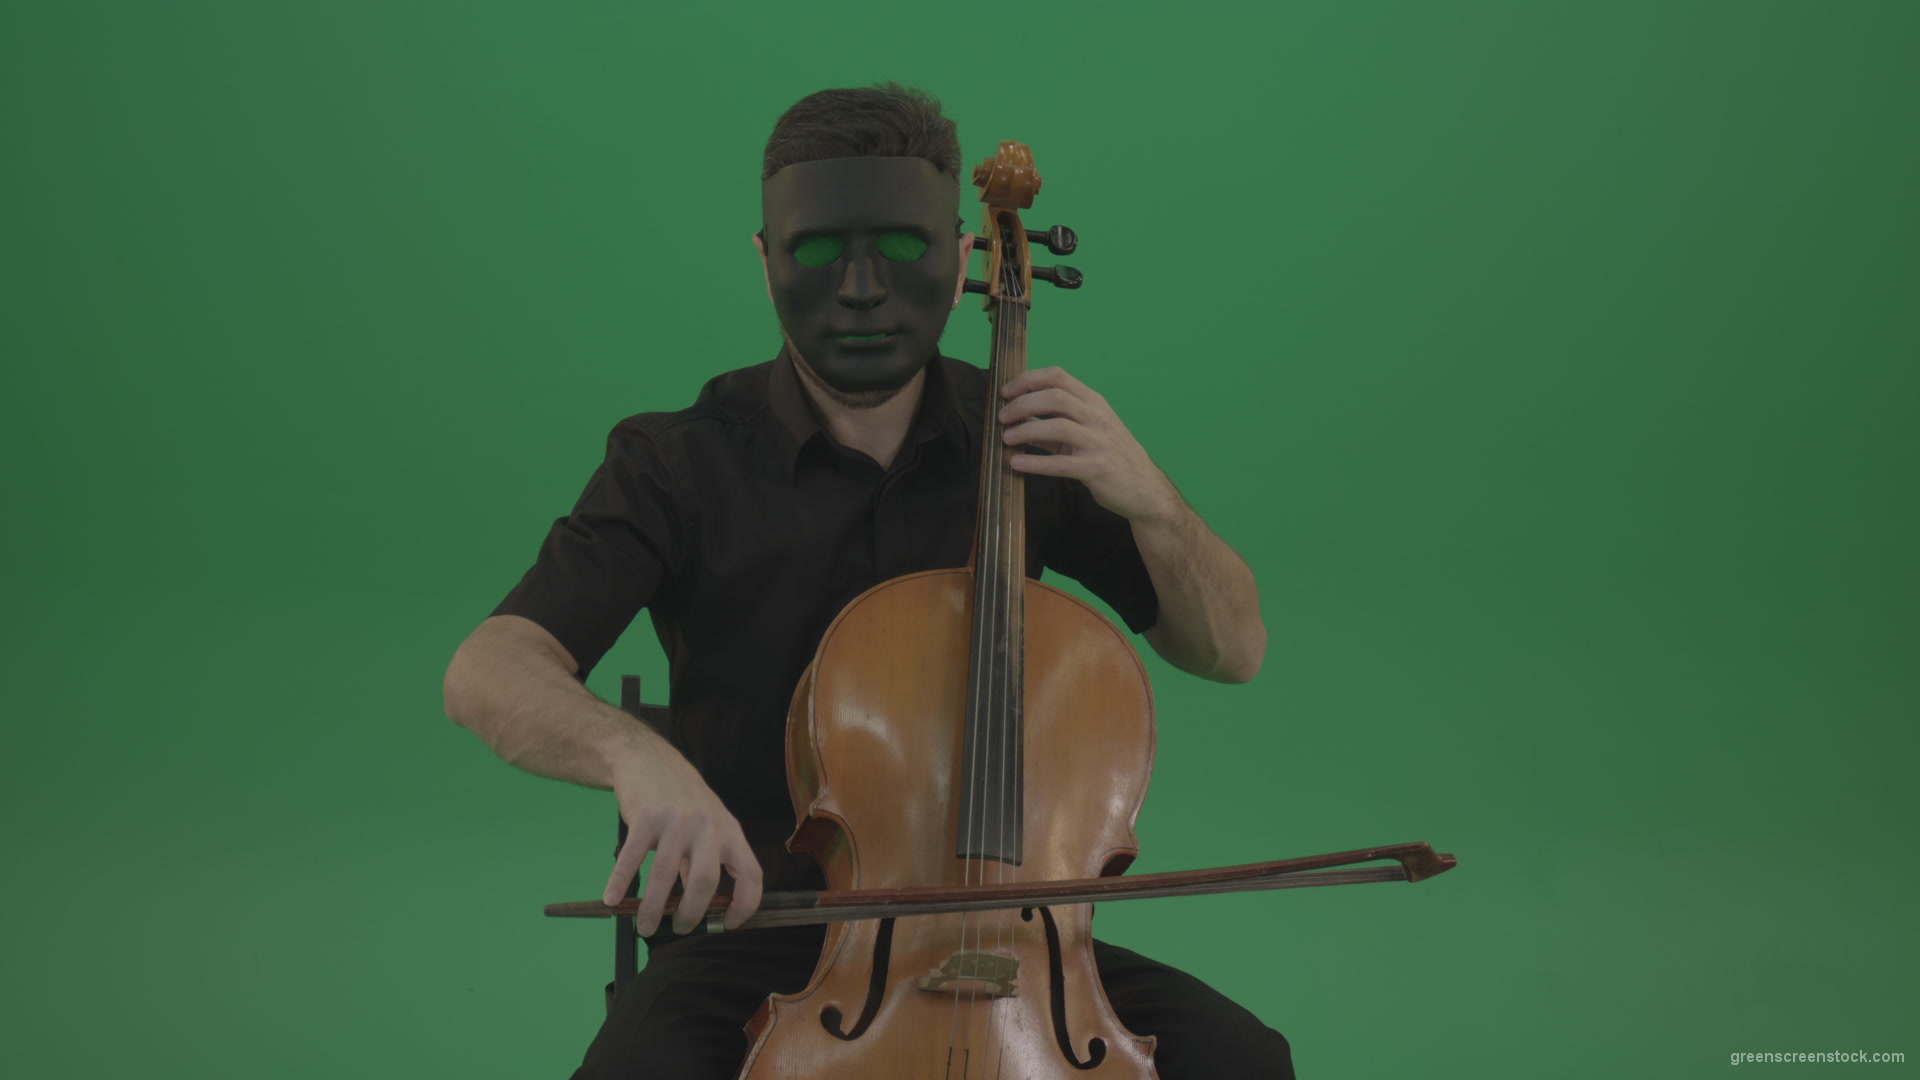 Gothic-Man-in-black-mask-playing-violoncello-cello-strings-music-instrument-isolated-on-green-screen_001 Green Screen Stock